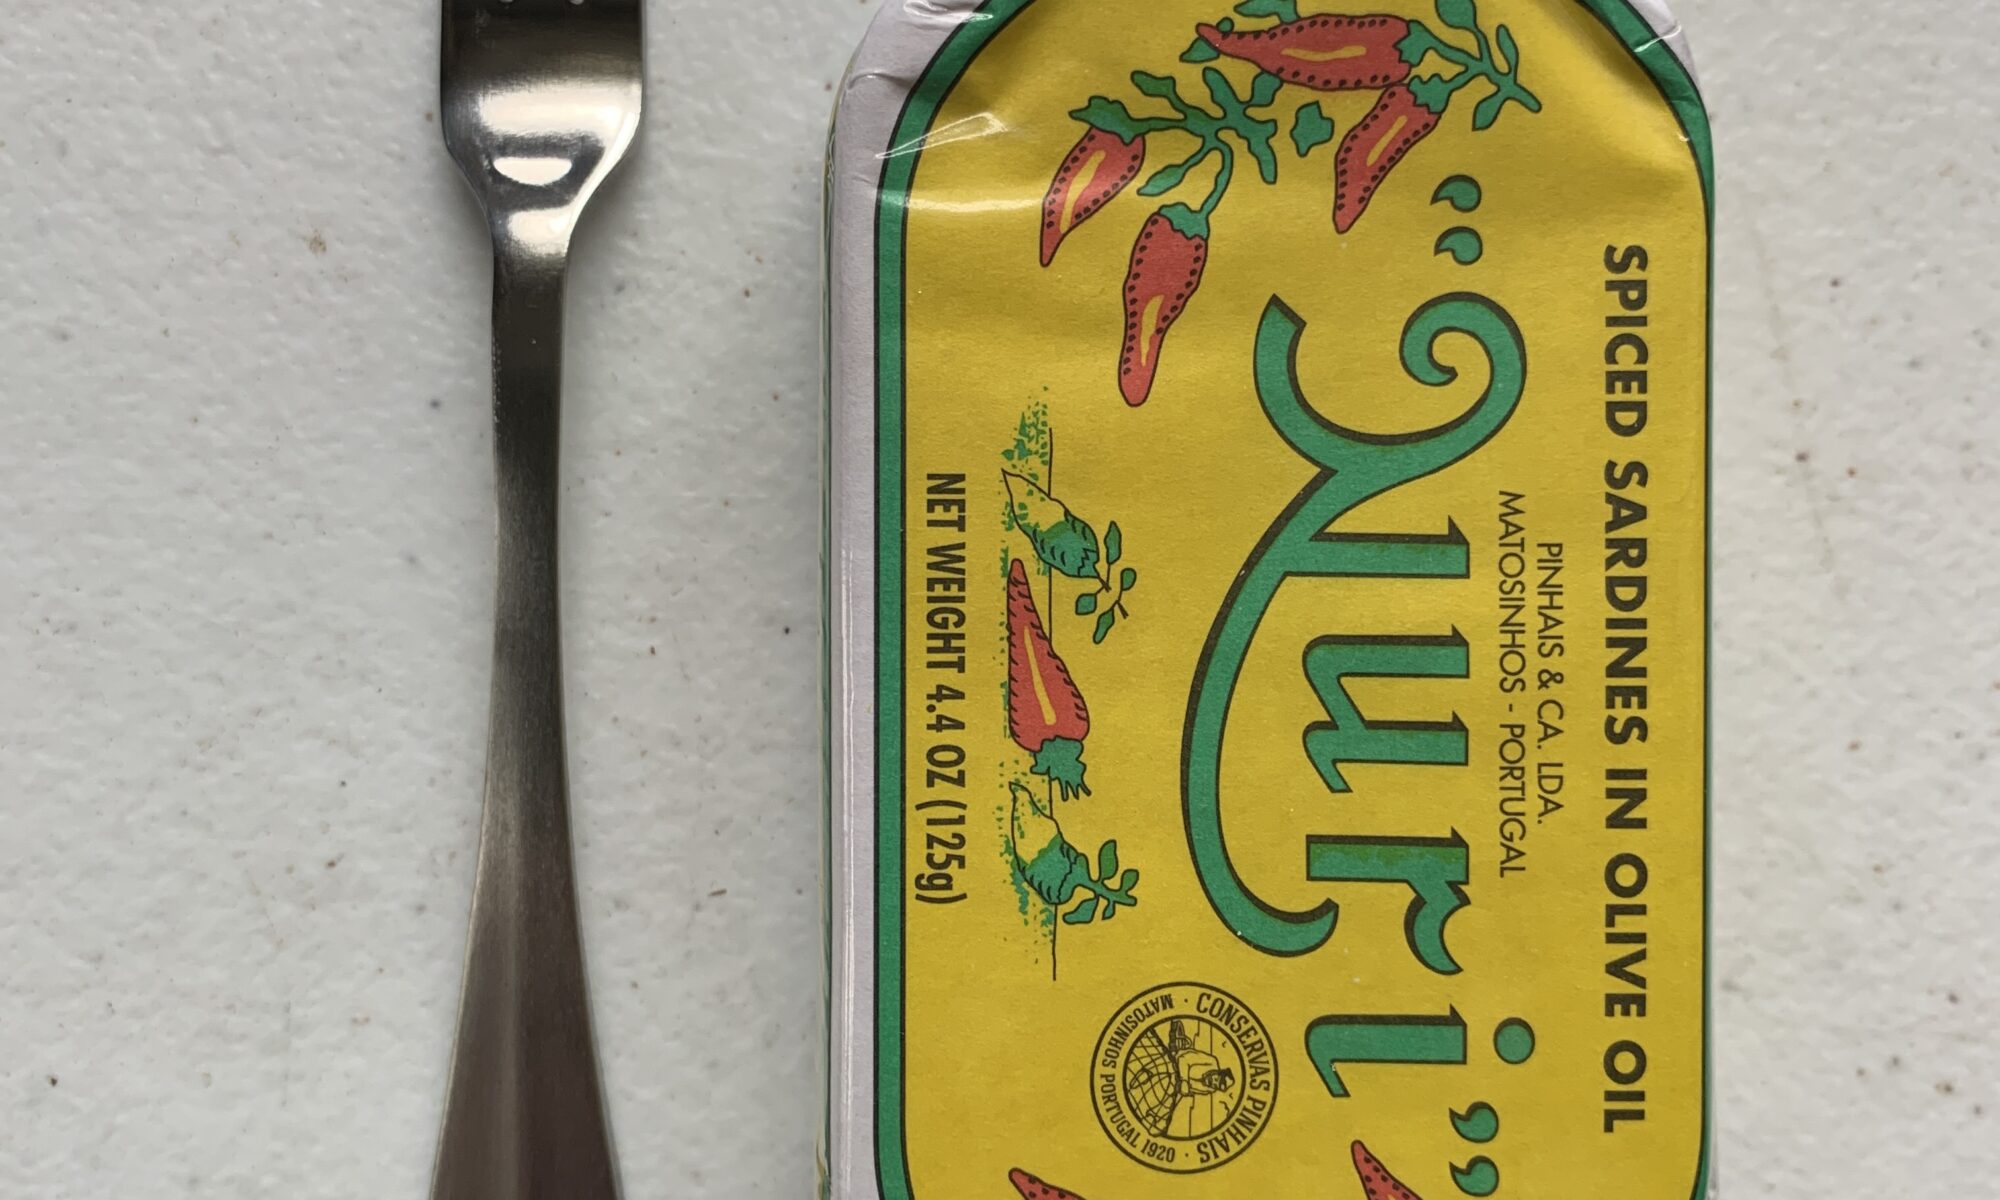 Image of a Cocktail Fork, Choice Midland, Stainless Steel, Medium Weight next to a tin of sardines for scale